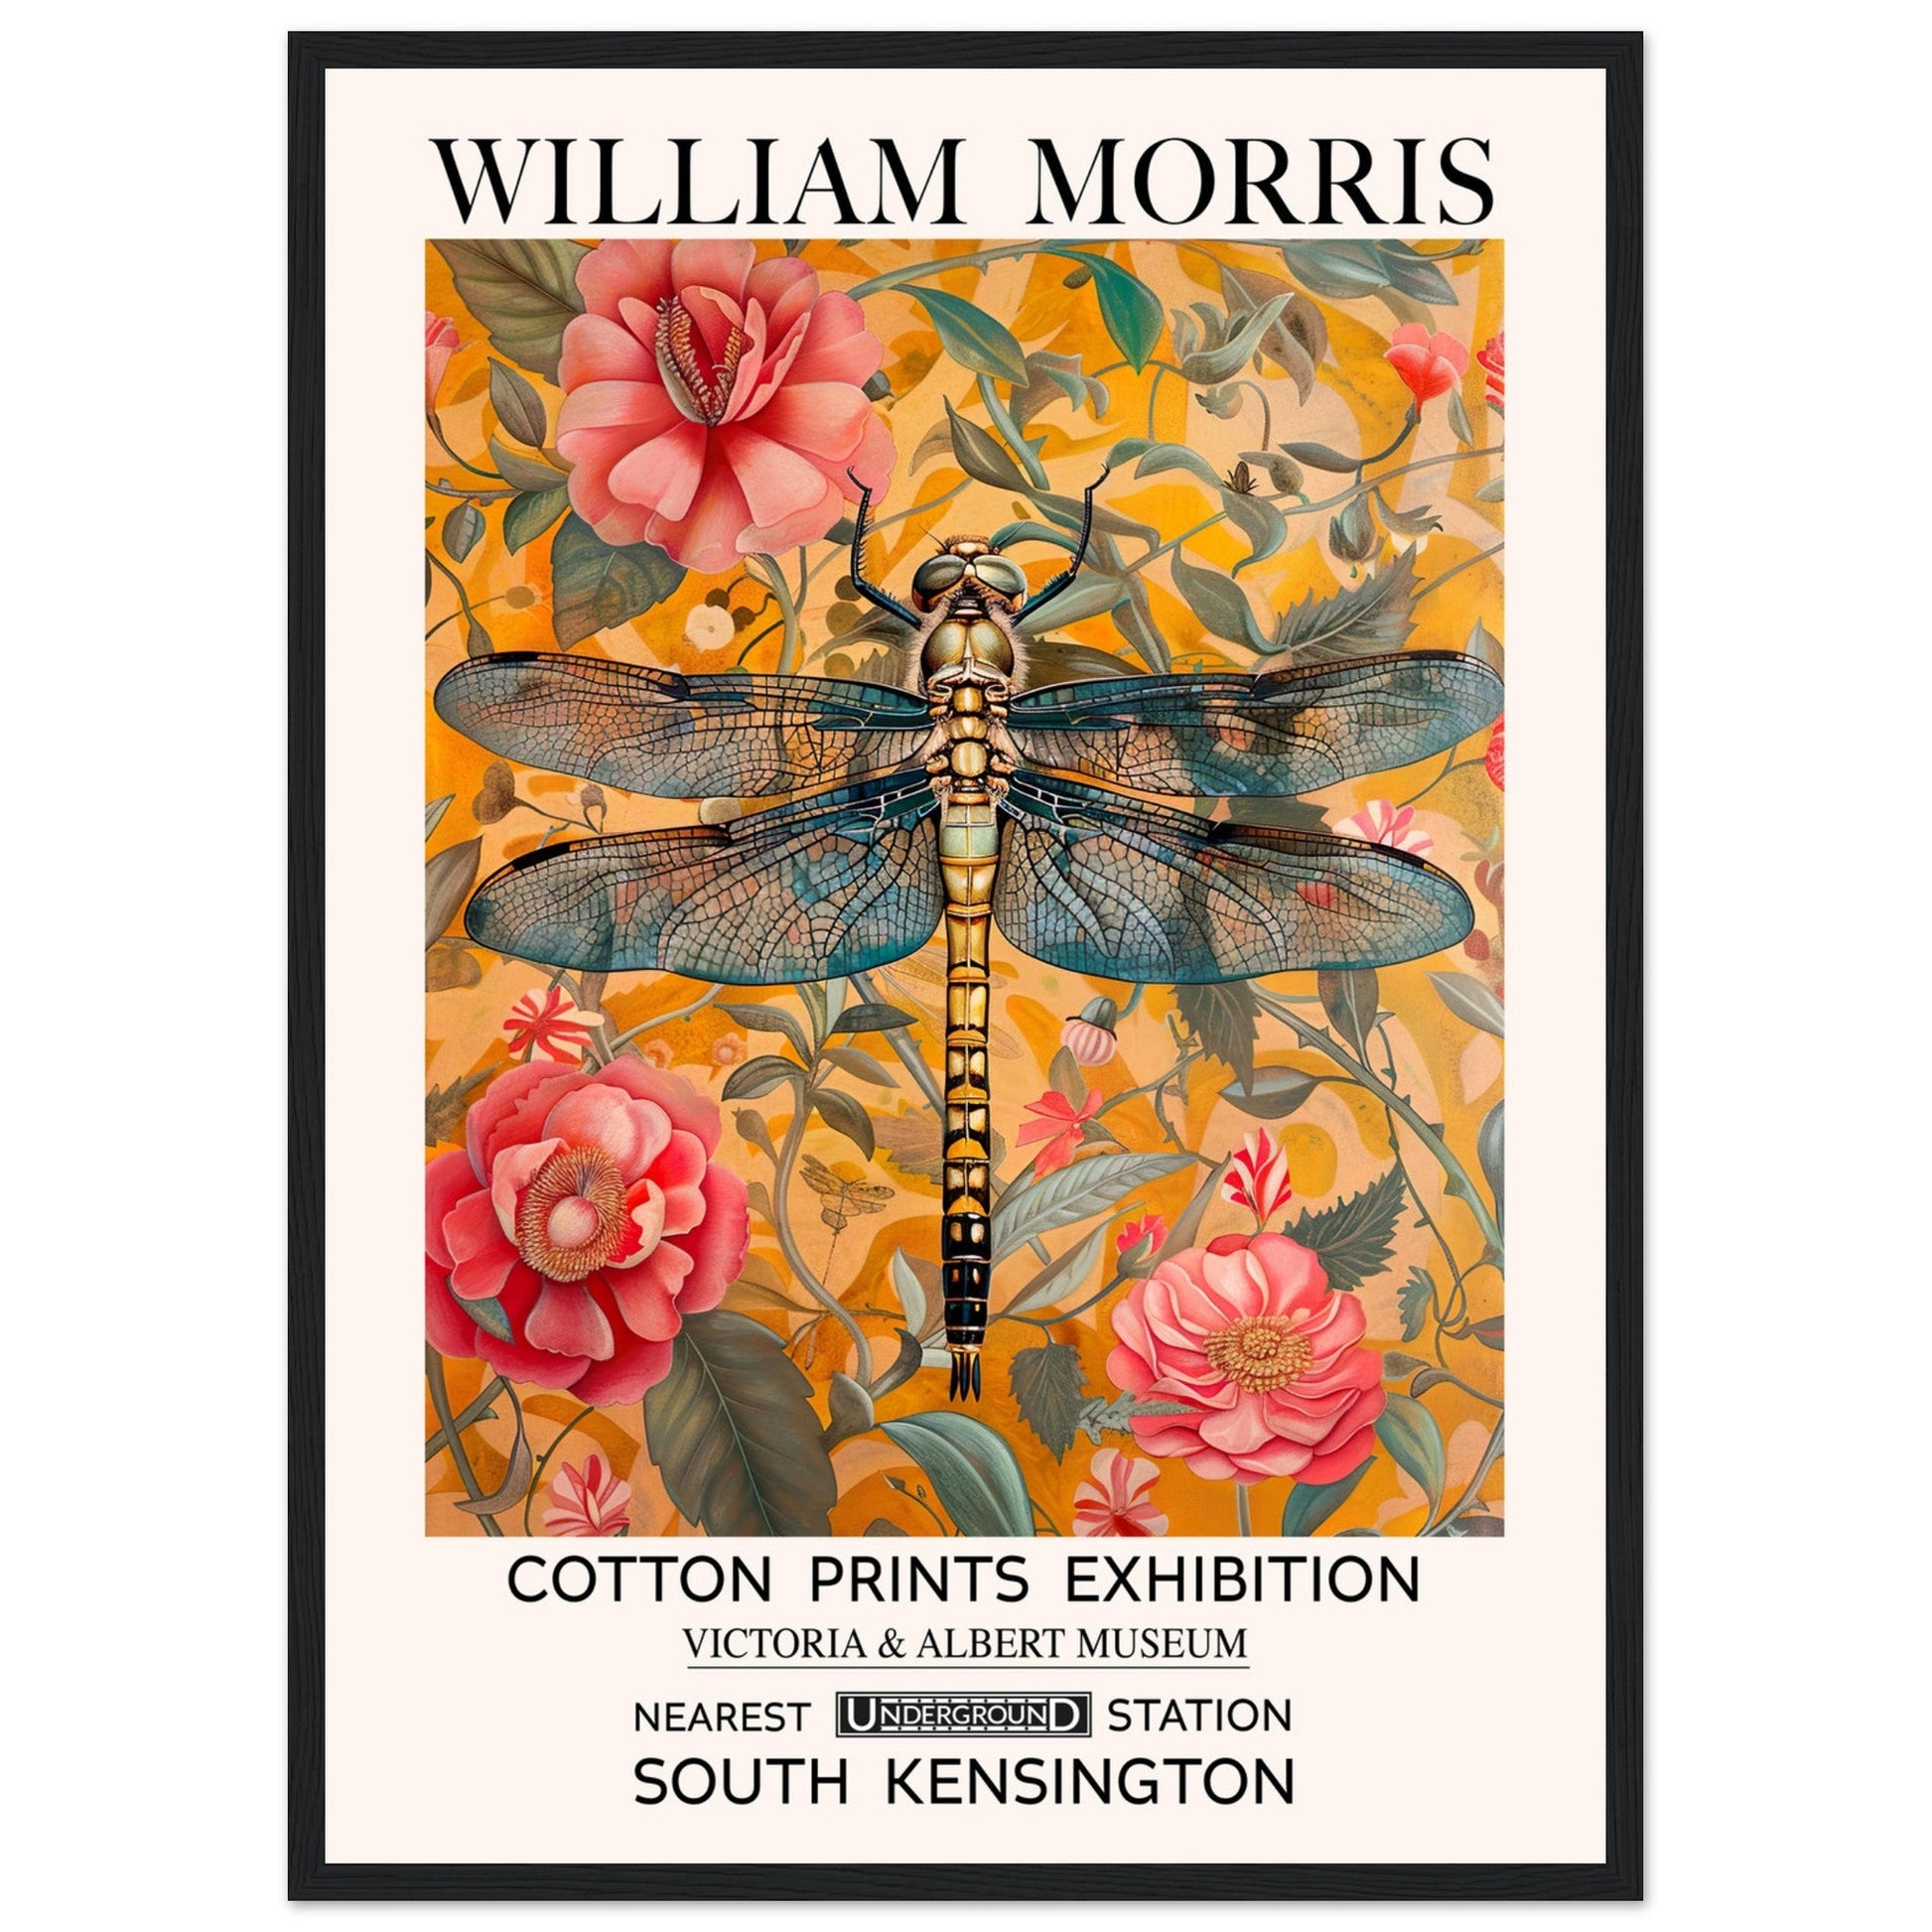 William Morris Framed Print - The Dragonfly, Floral Background, Framed Art print, yellow, #illieeart